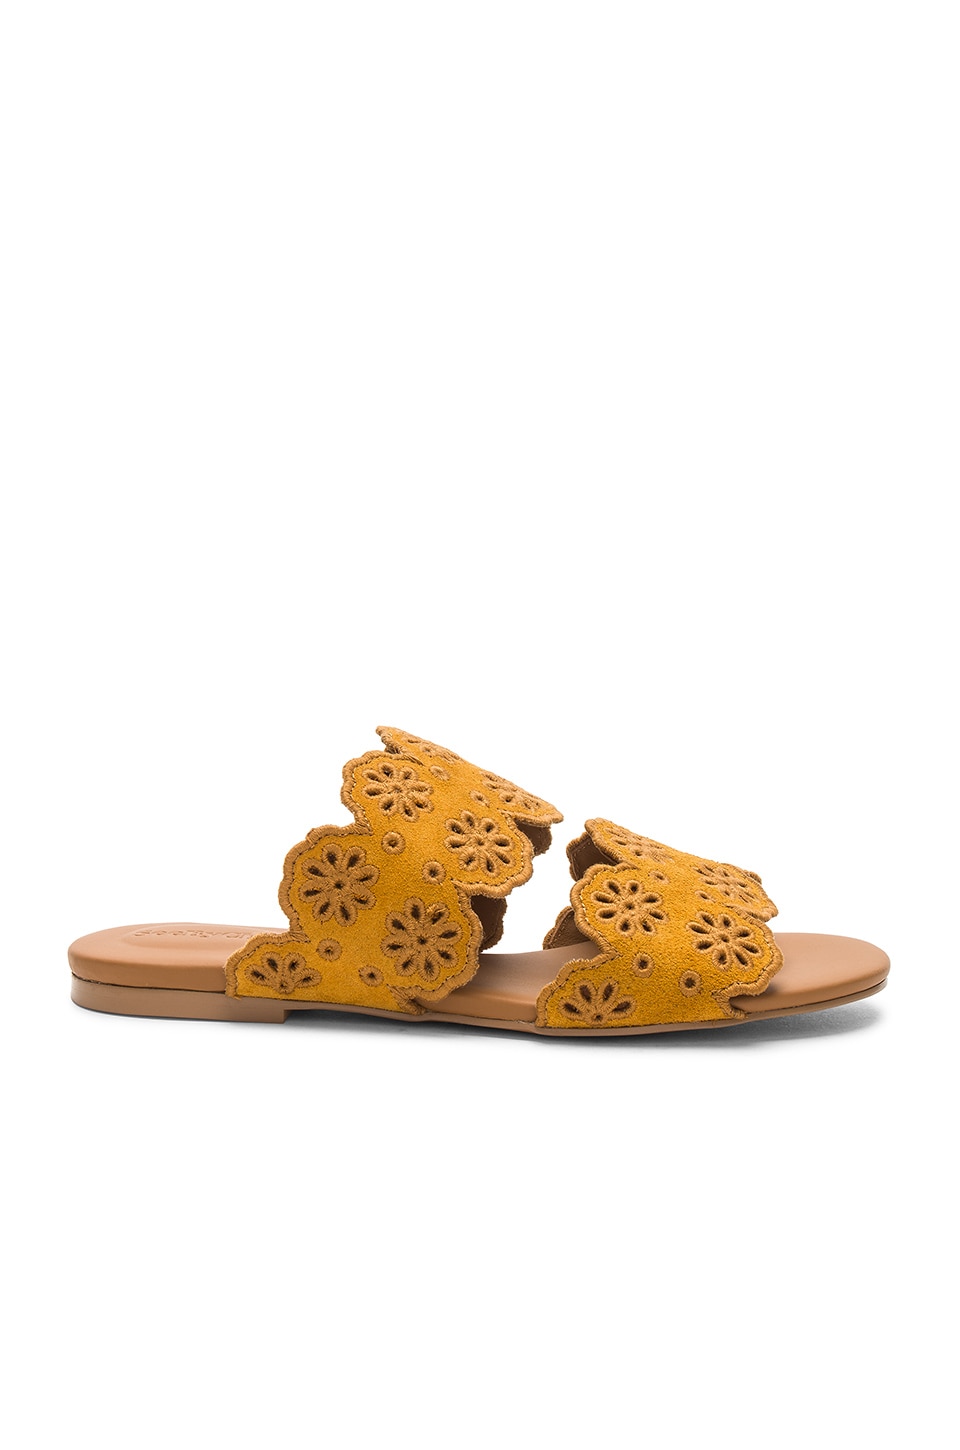 See By Chloe Eyelet Sandal in Curry | REVOLVE